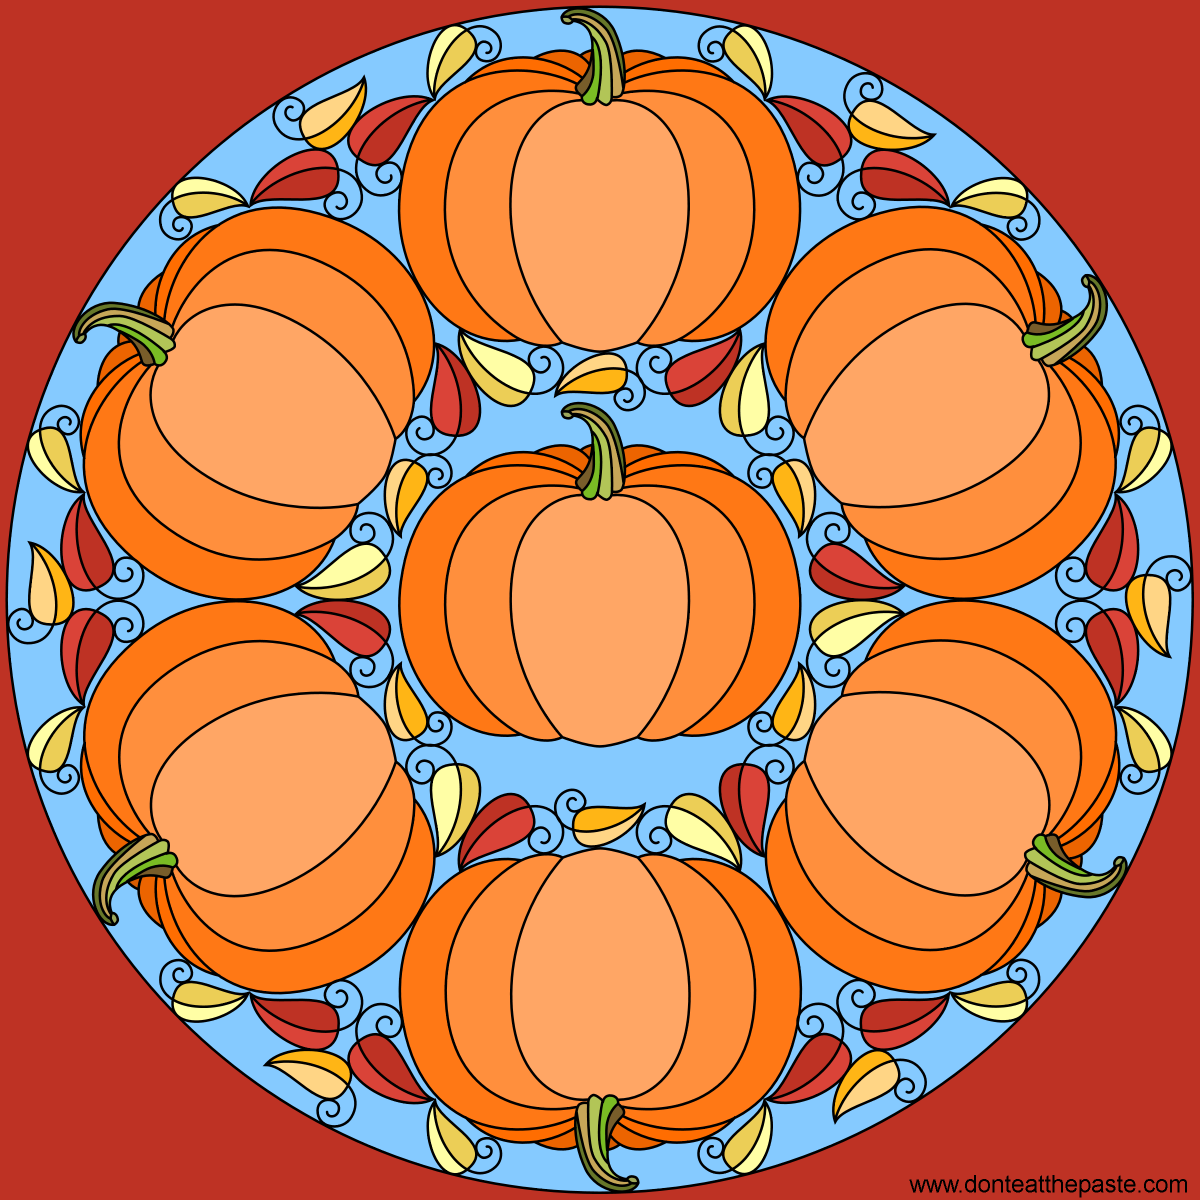 Pumpkin mandala for autumn- blank version available to color